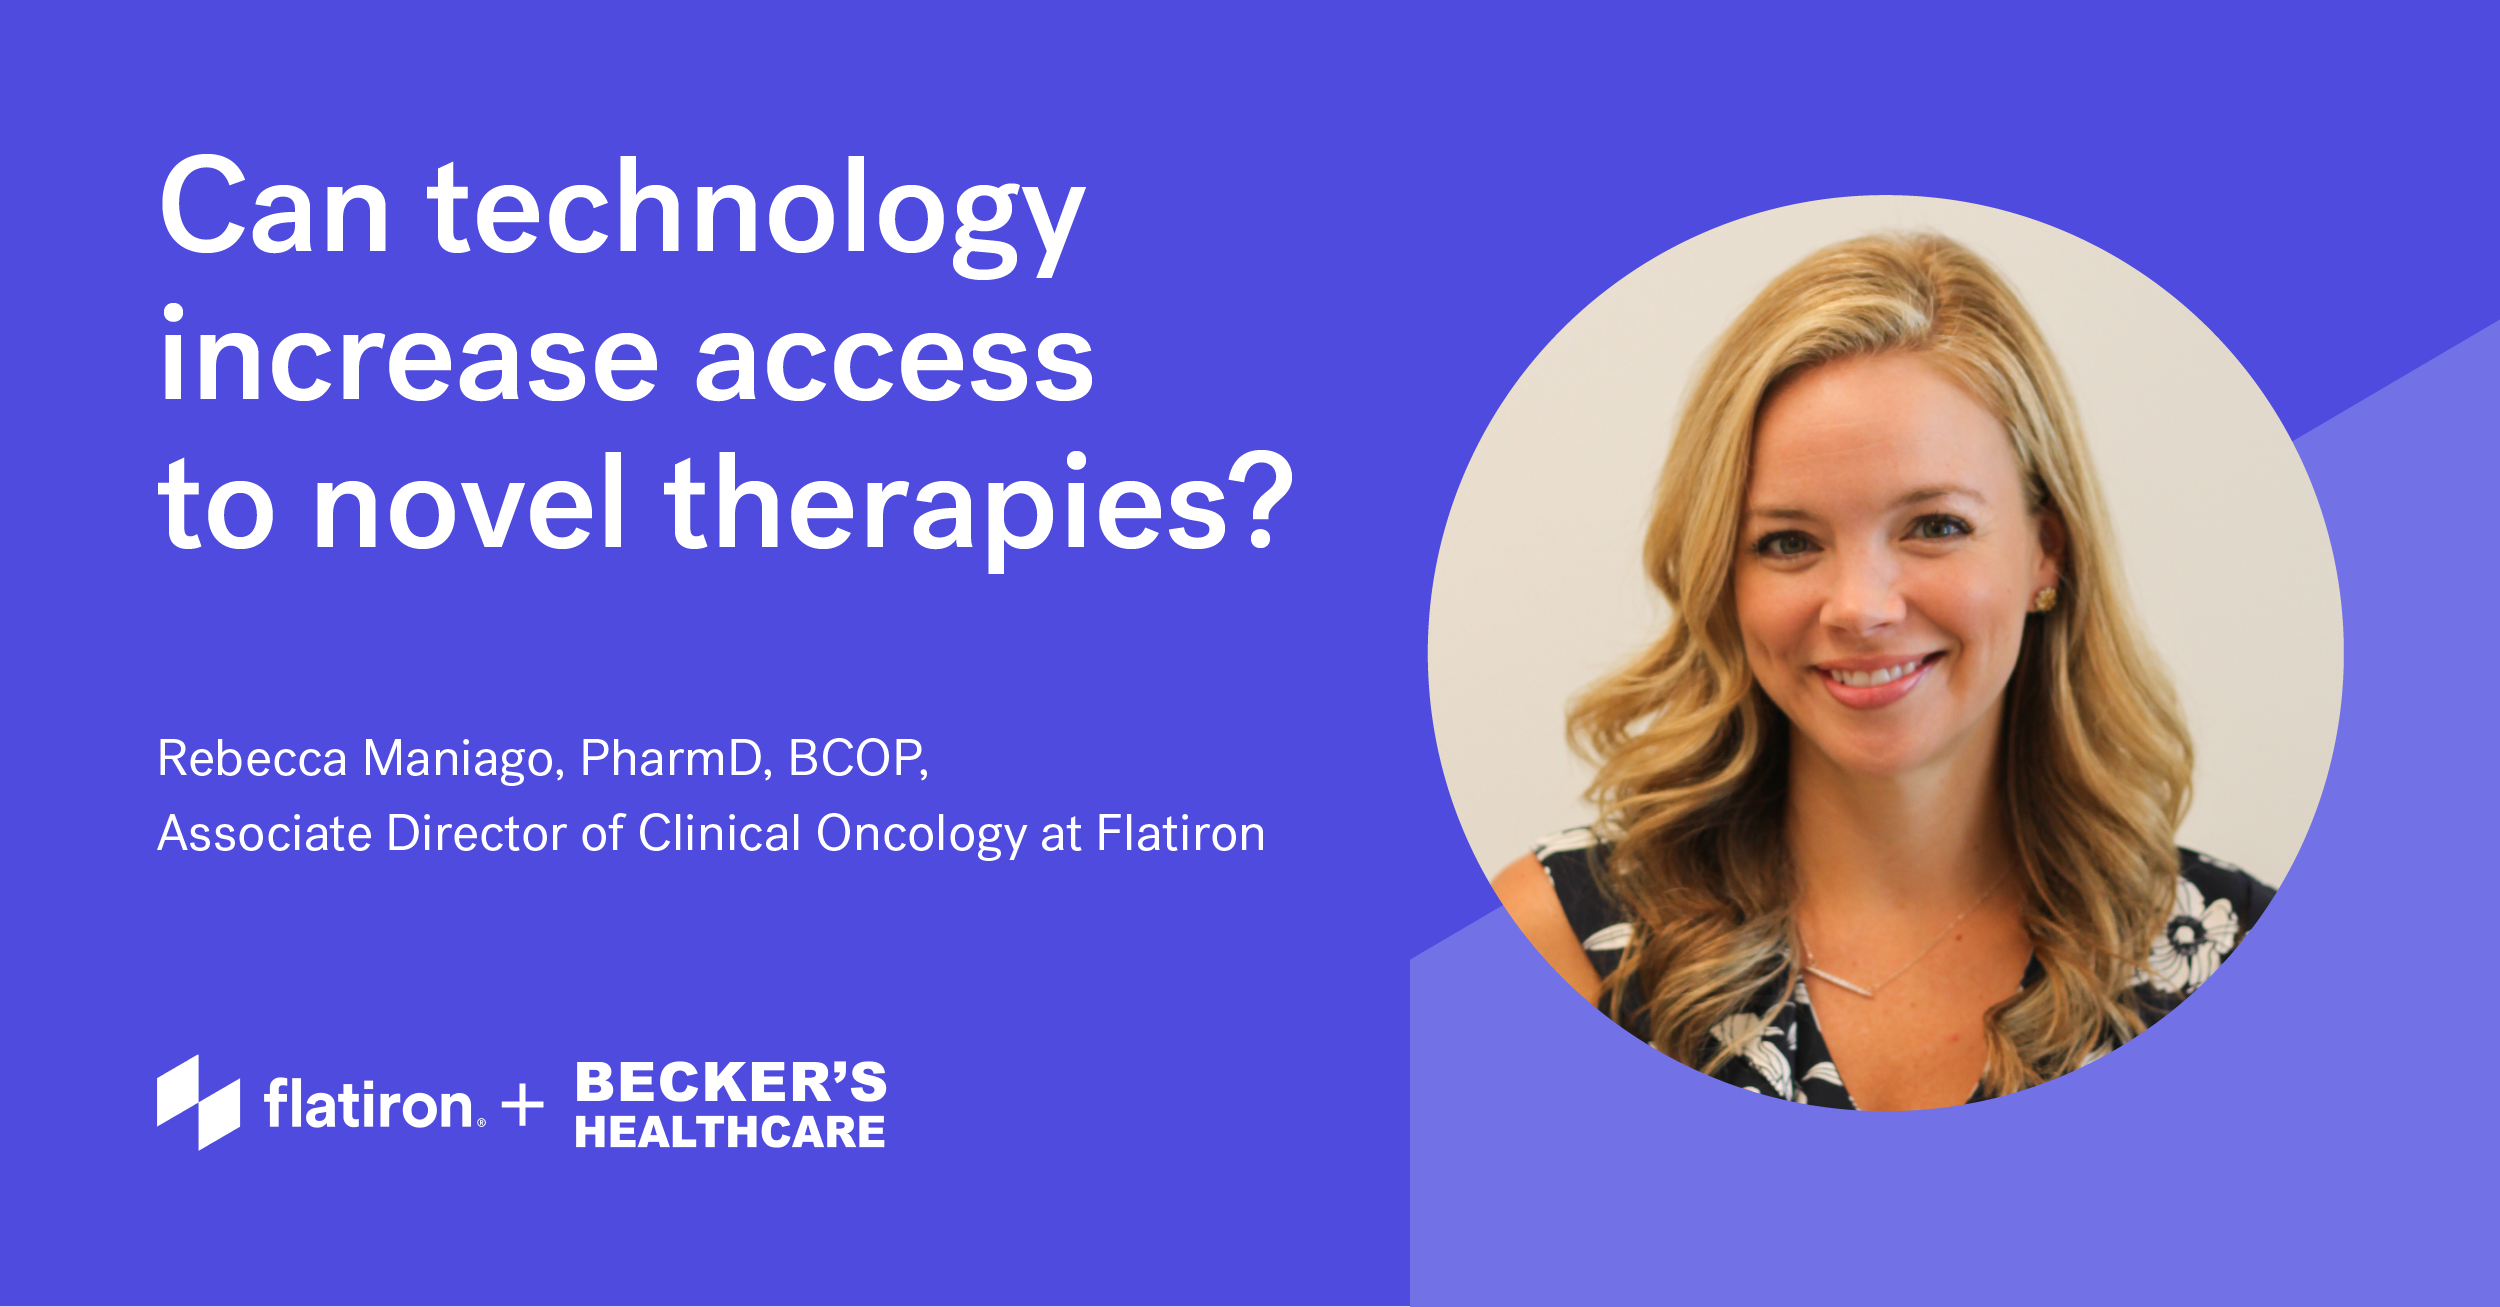 A Pharmacist’s Perspective: Can Technology Increase Access to Novel Therapies?